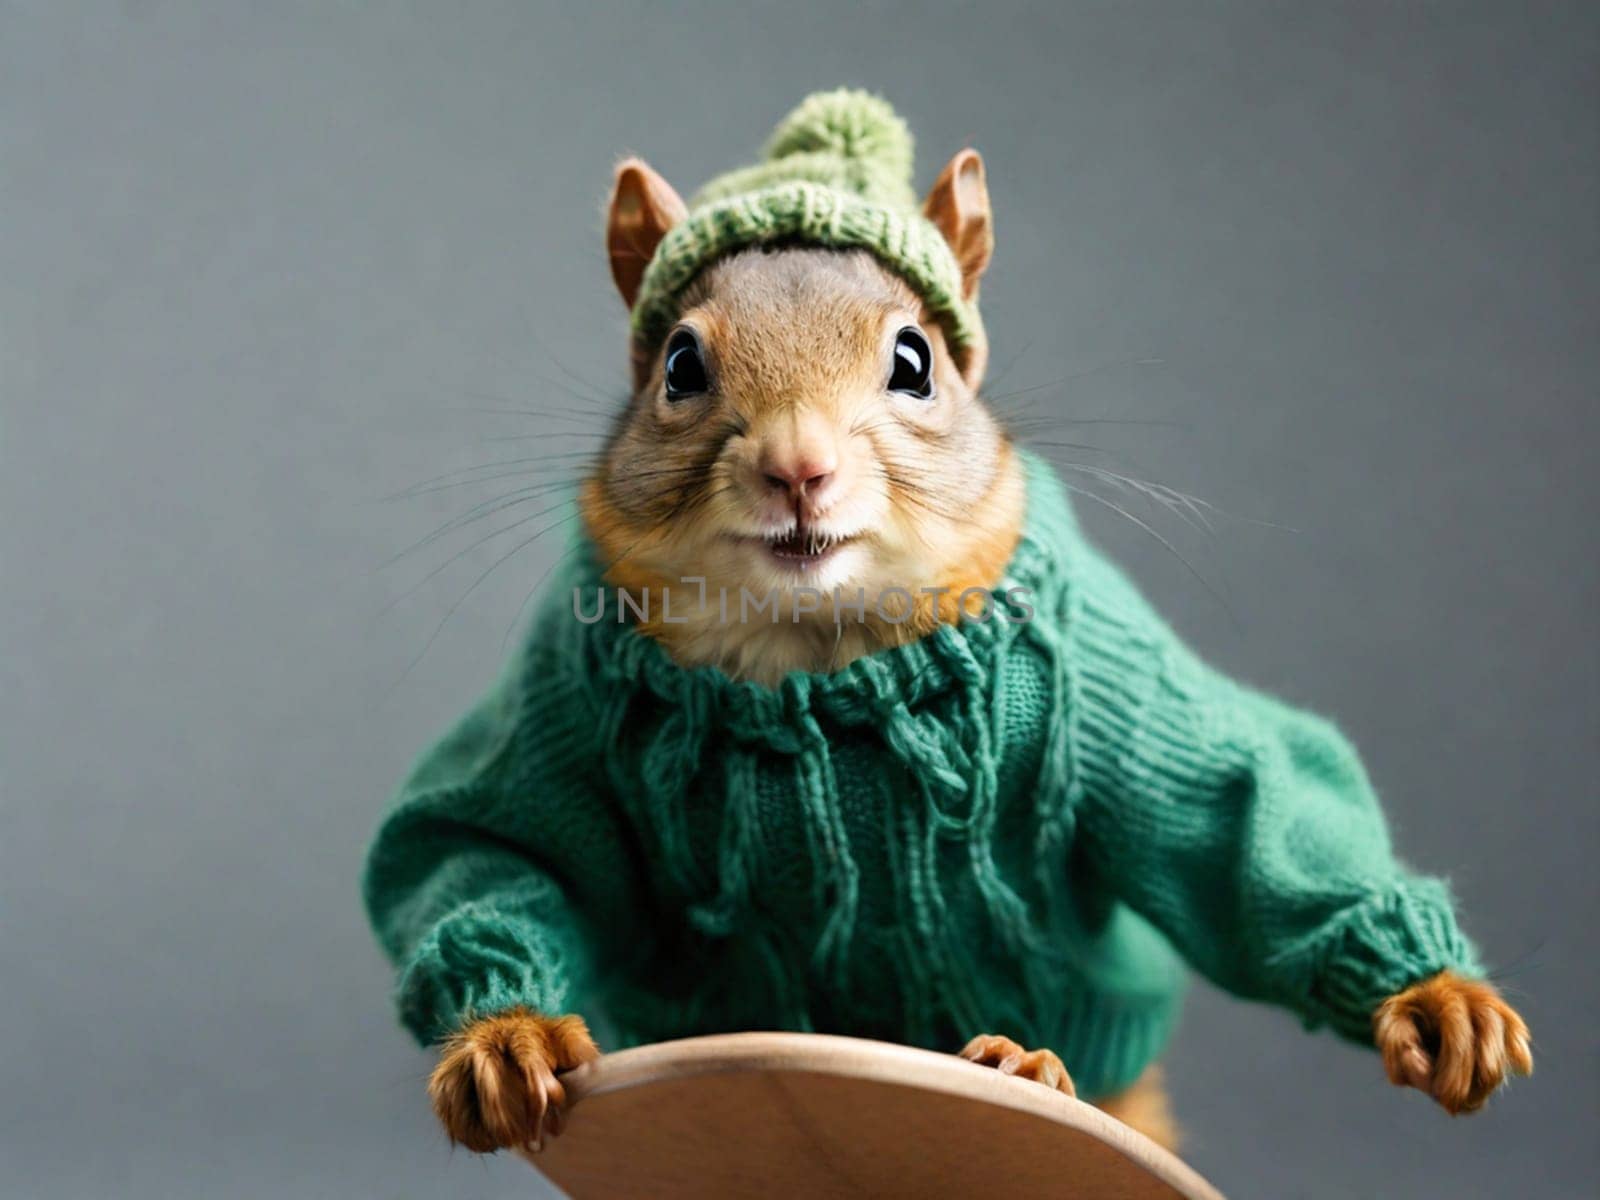 Funny squirrel in a green sweater and hat on a skateboard